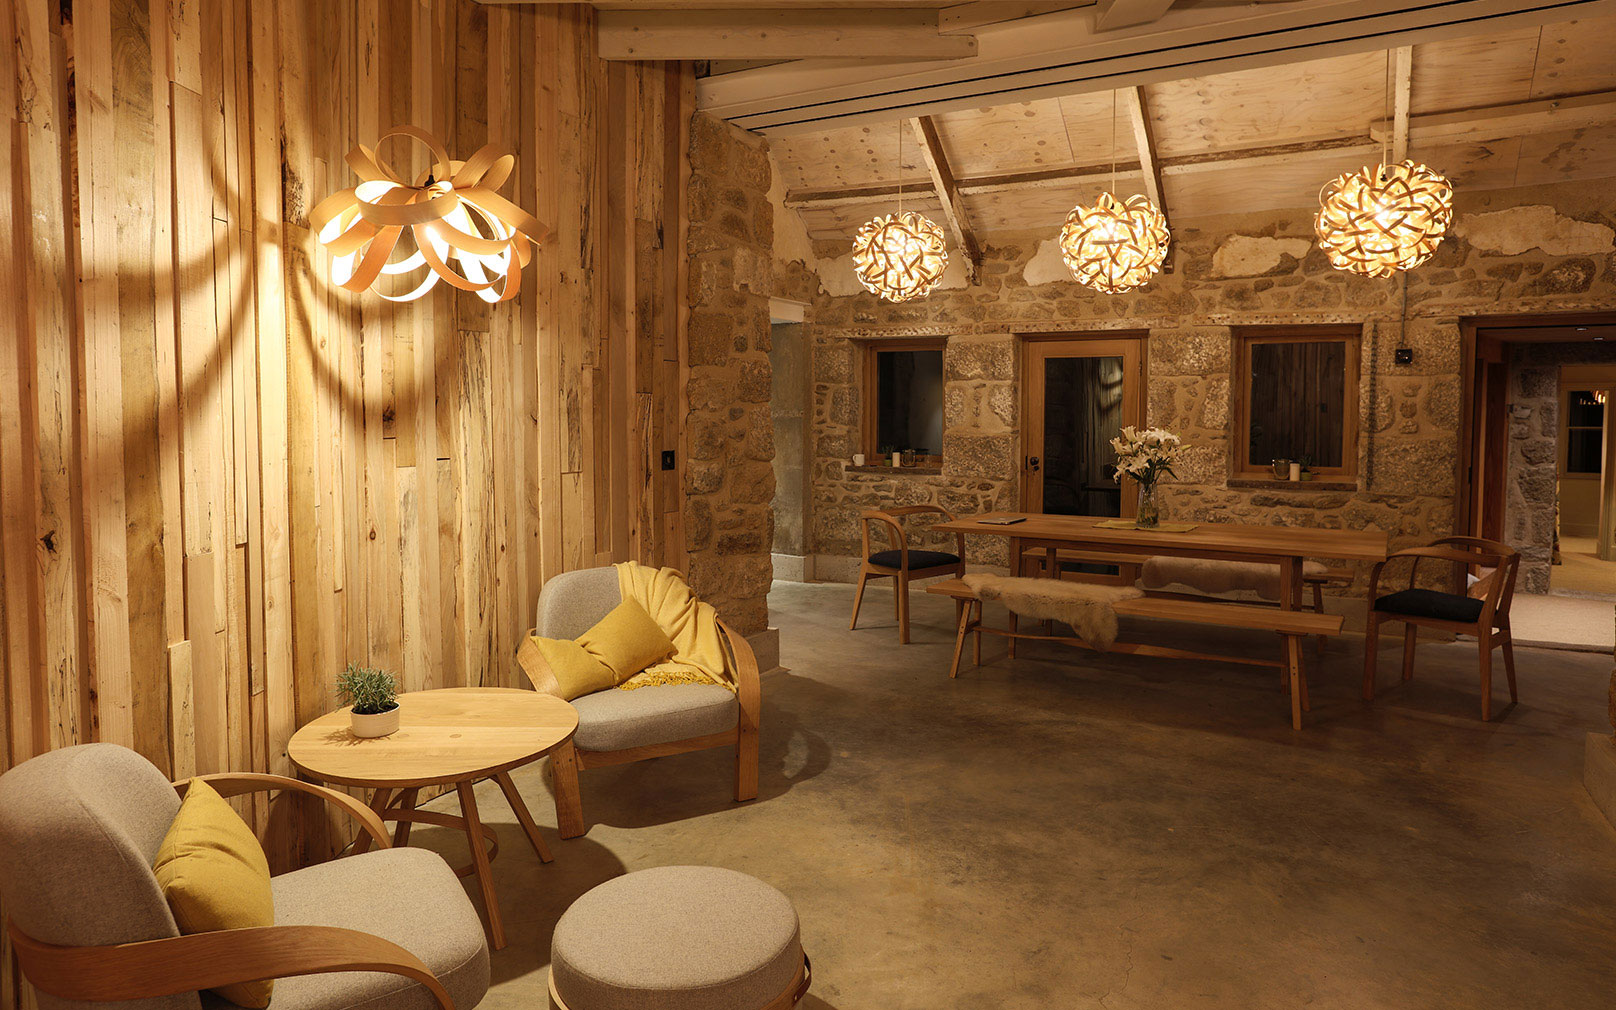 Inside Tom Raffield's house, with wooden walls, concrete floor and his steam-bent-wood lights